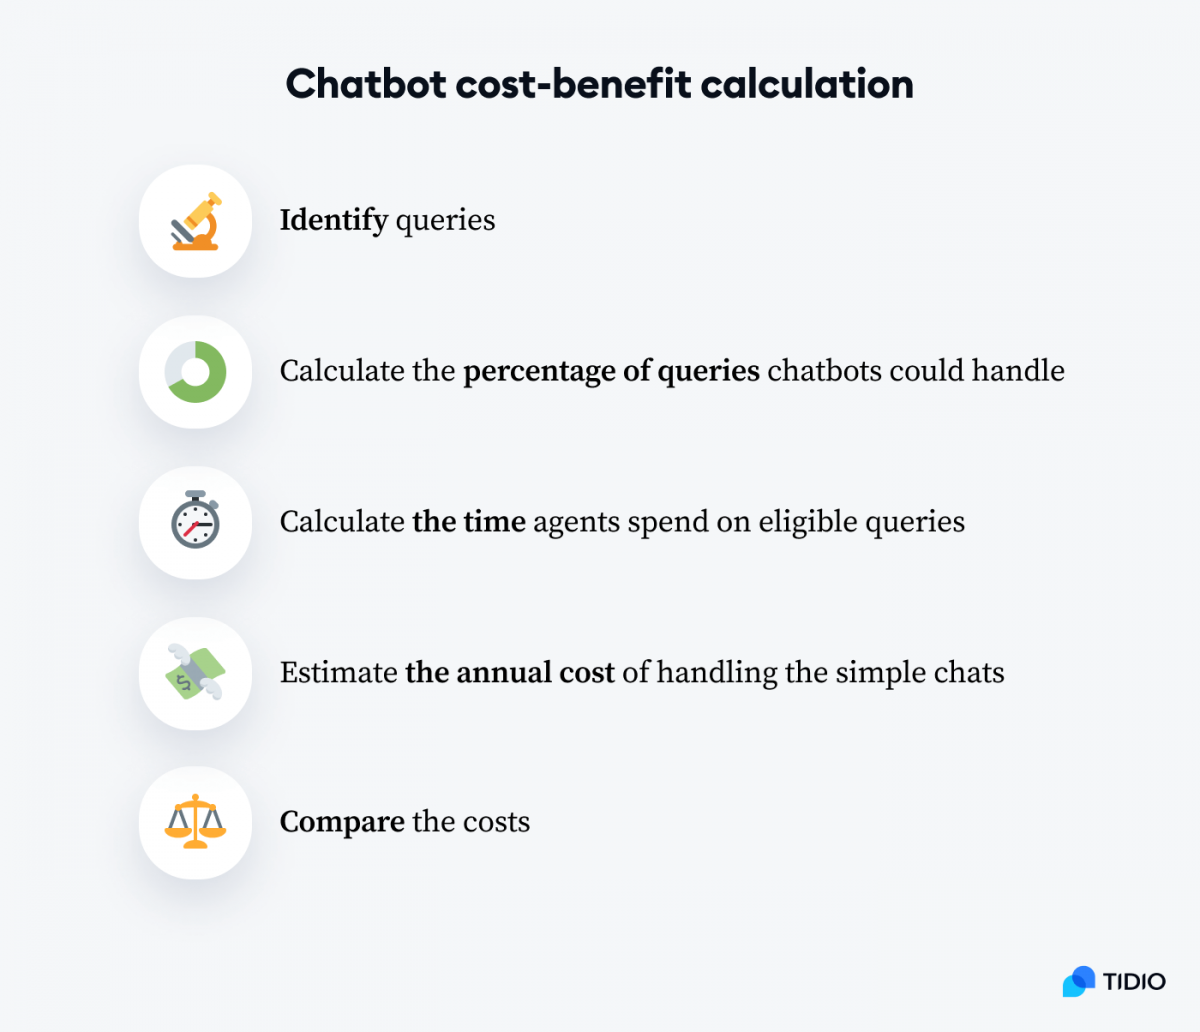 Chatbot cost-benefit calculation infographic